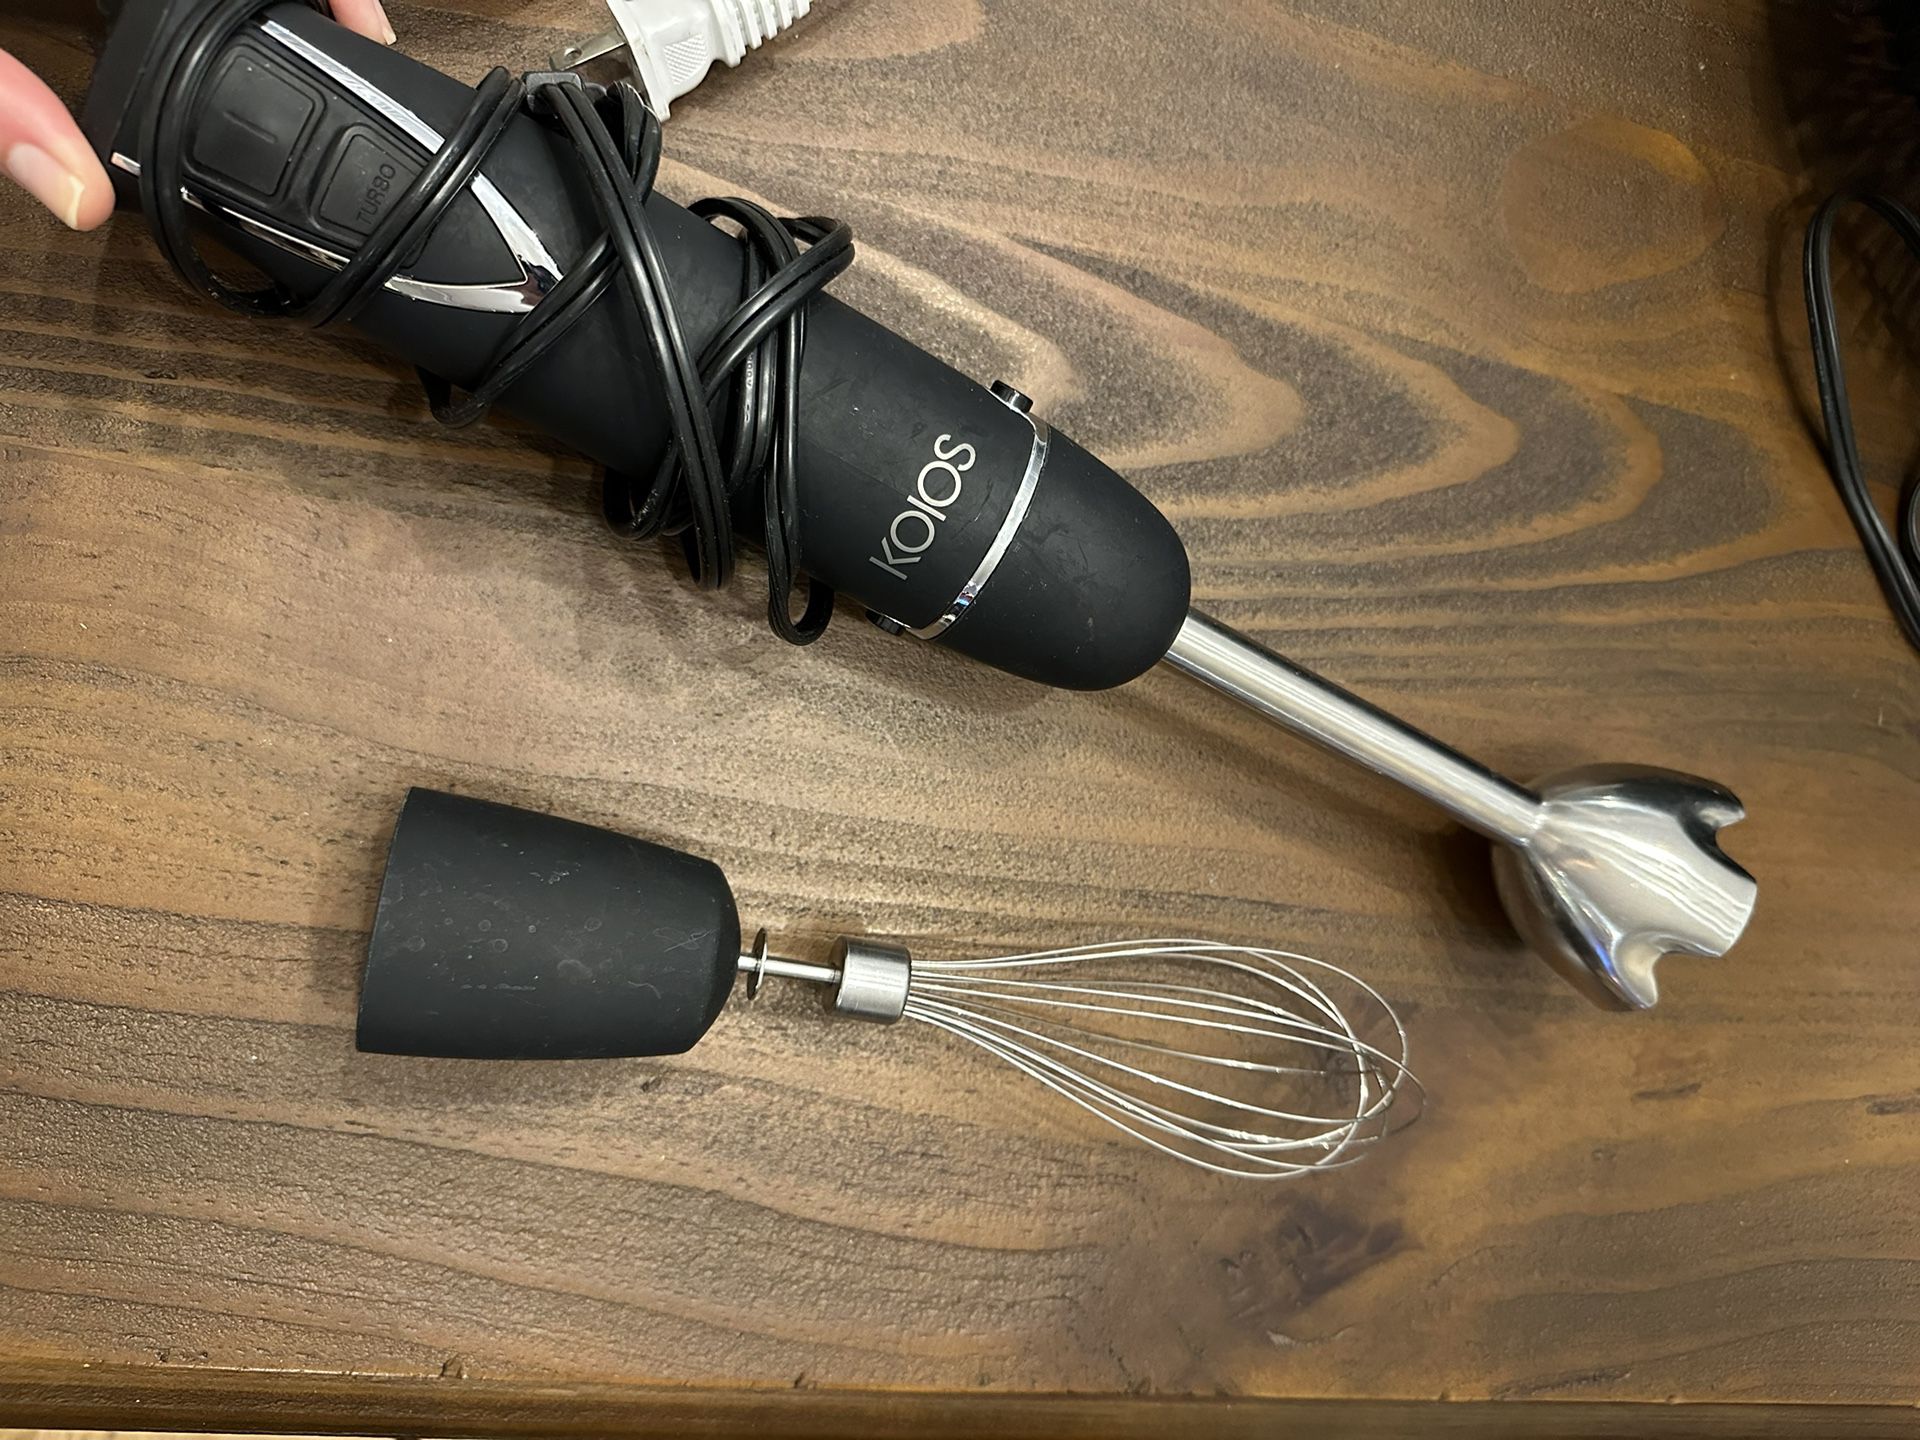 Koios Immersion Hand Blender for Sale in Chicago, IL - OfferUp